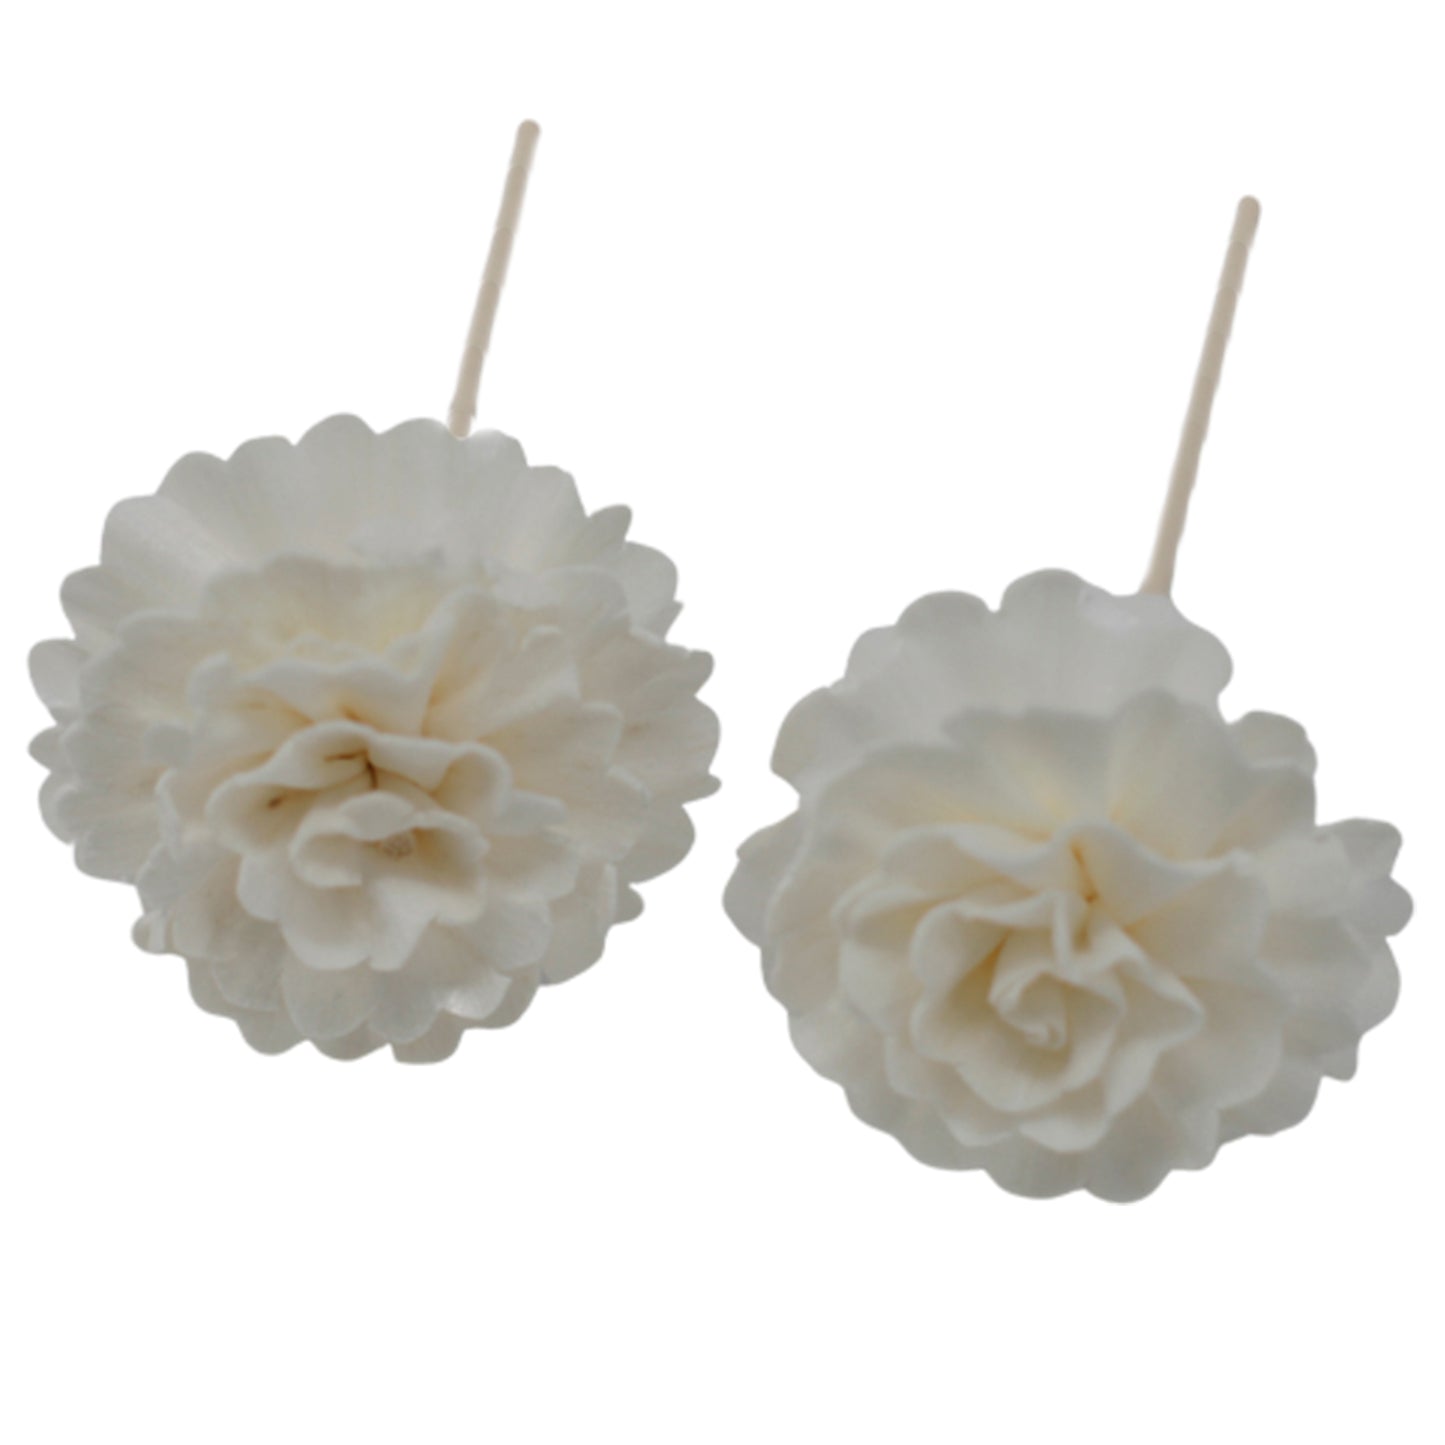 Natural Diffuser Flowers - Carnation on Reed